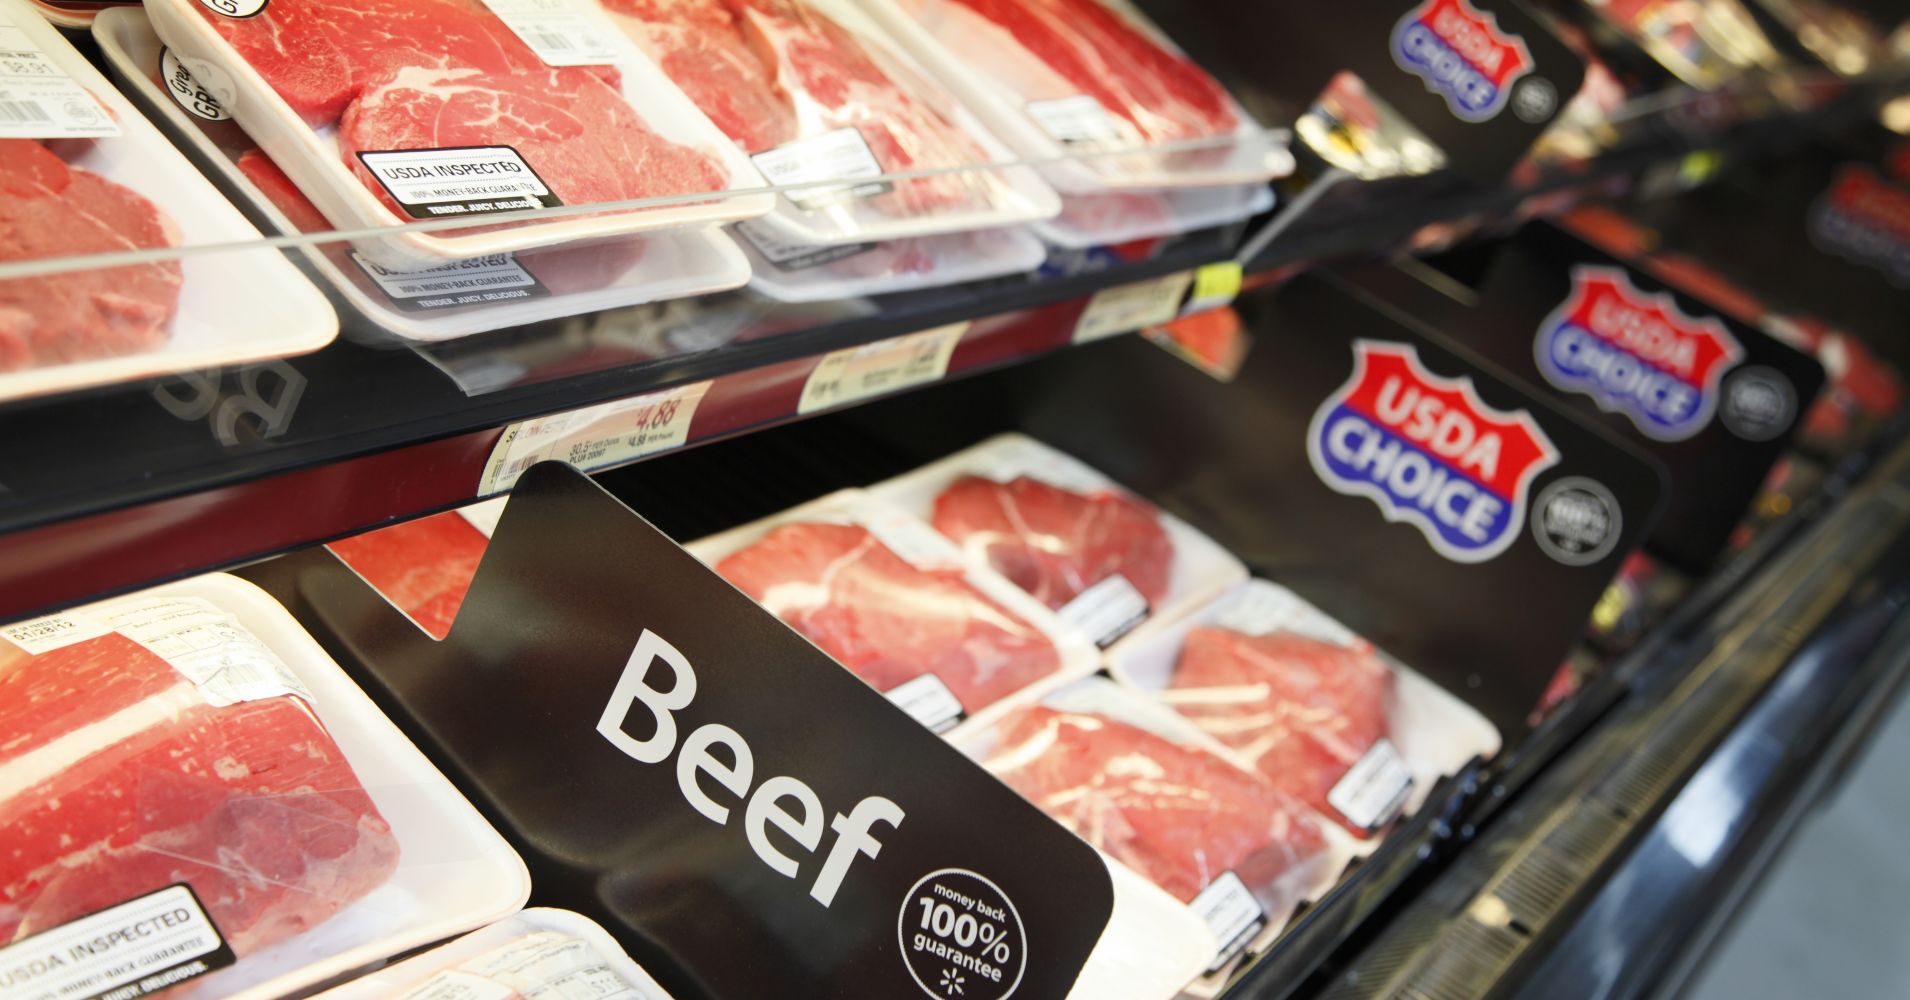 Beef can be seen on display at a WalMart store in Chicago.